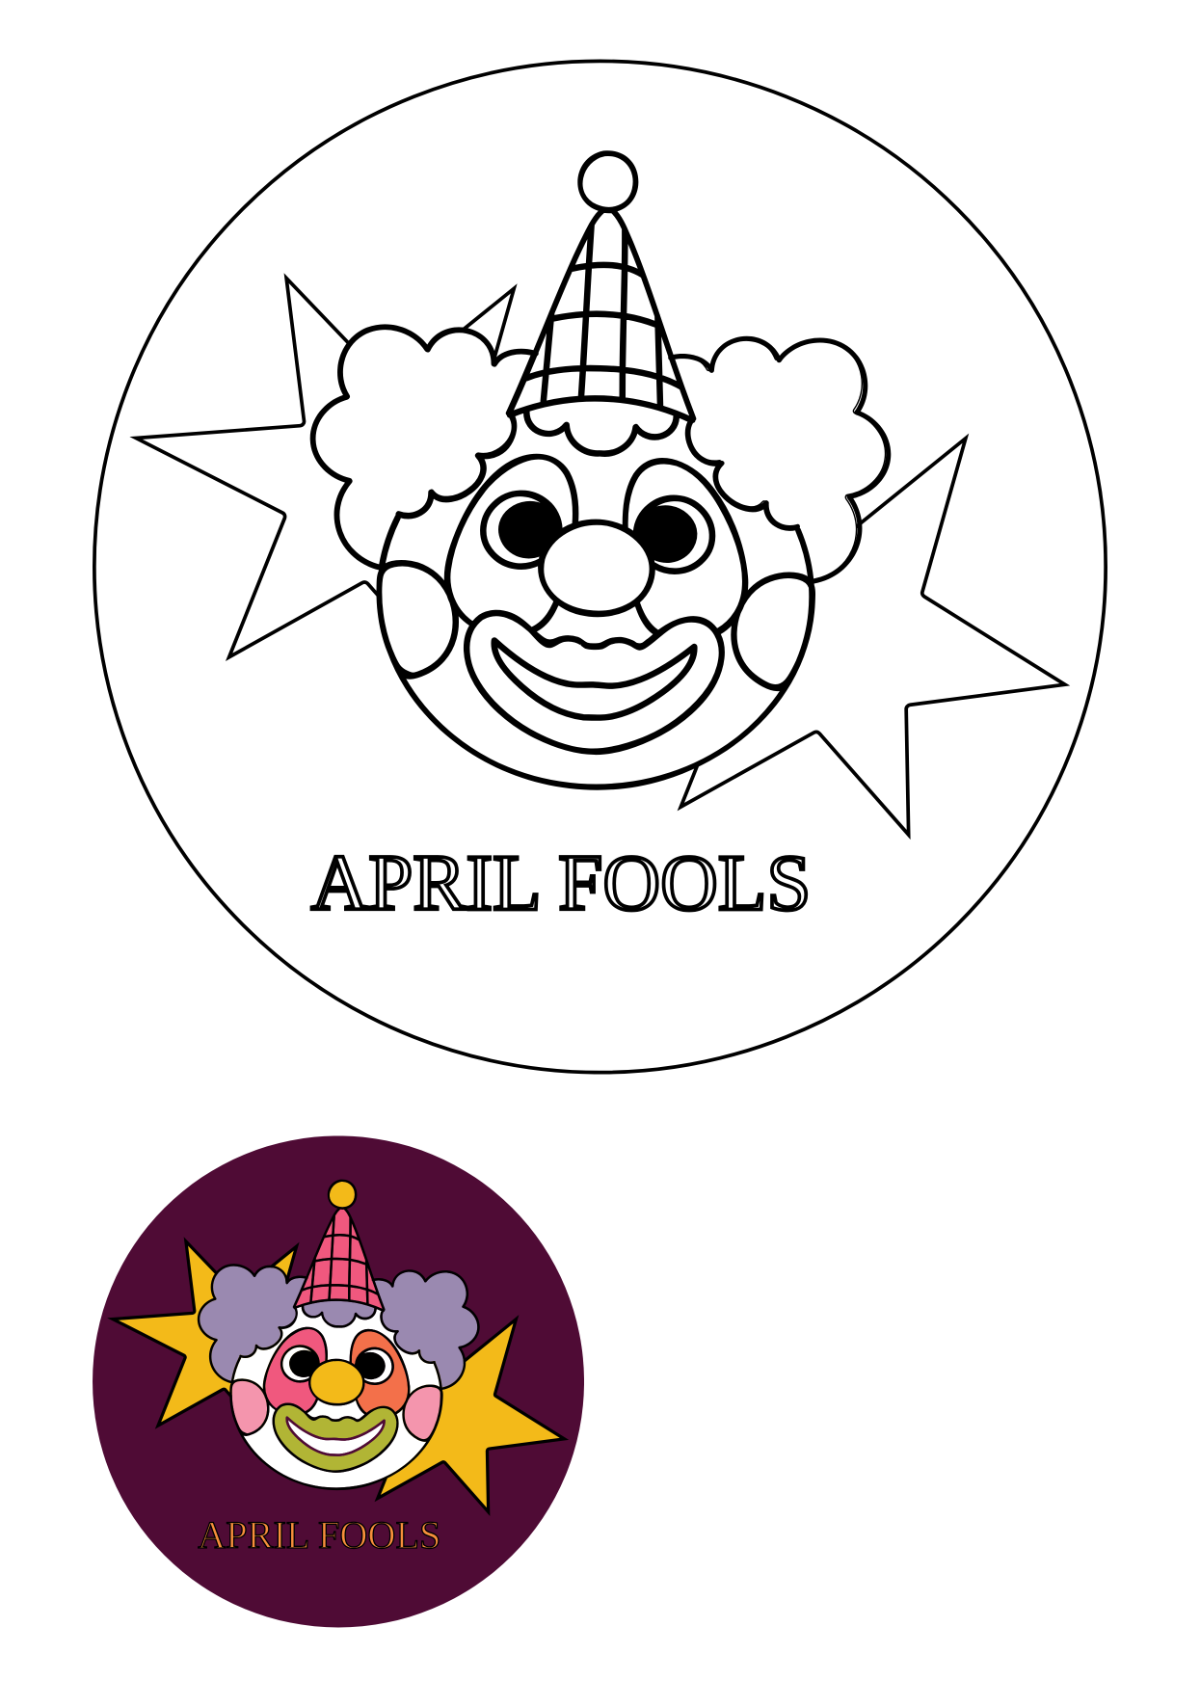 Easy April Fools’ Day Coloring Page